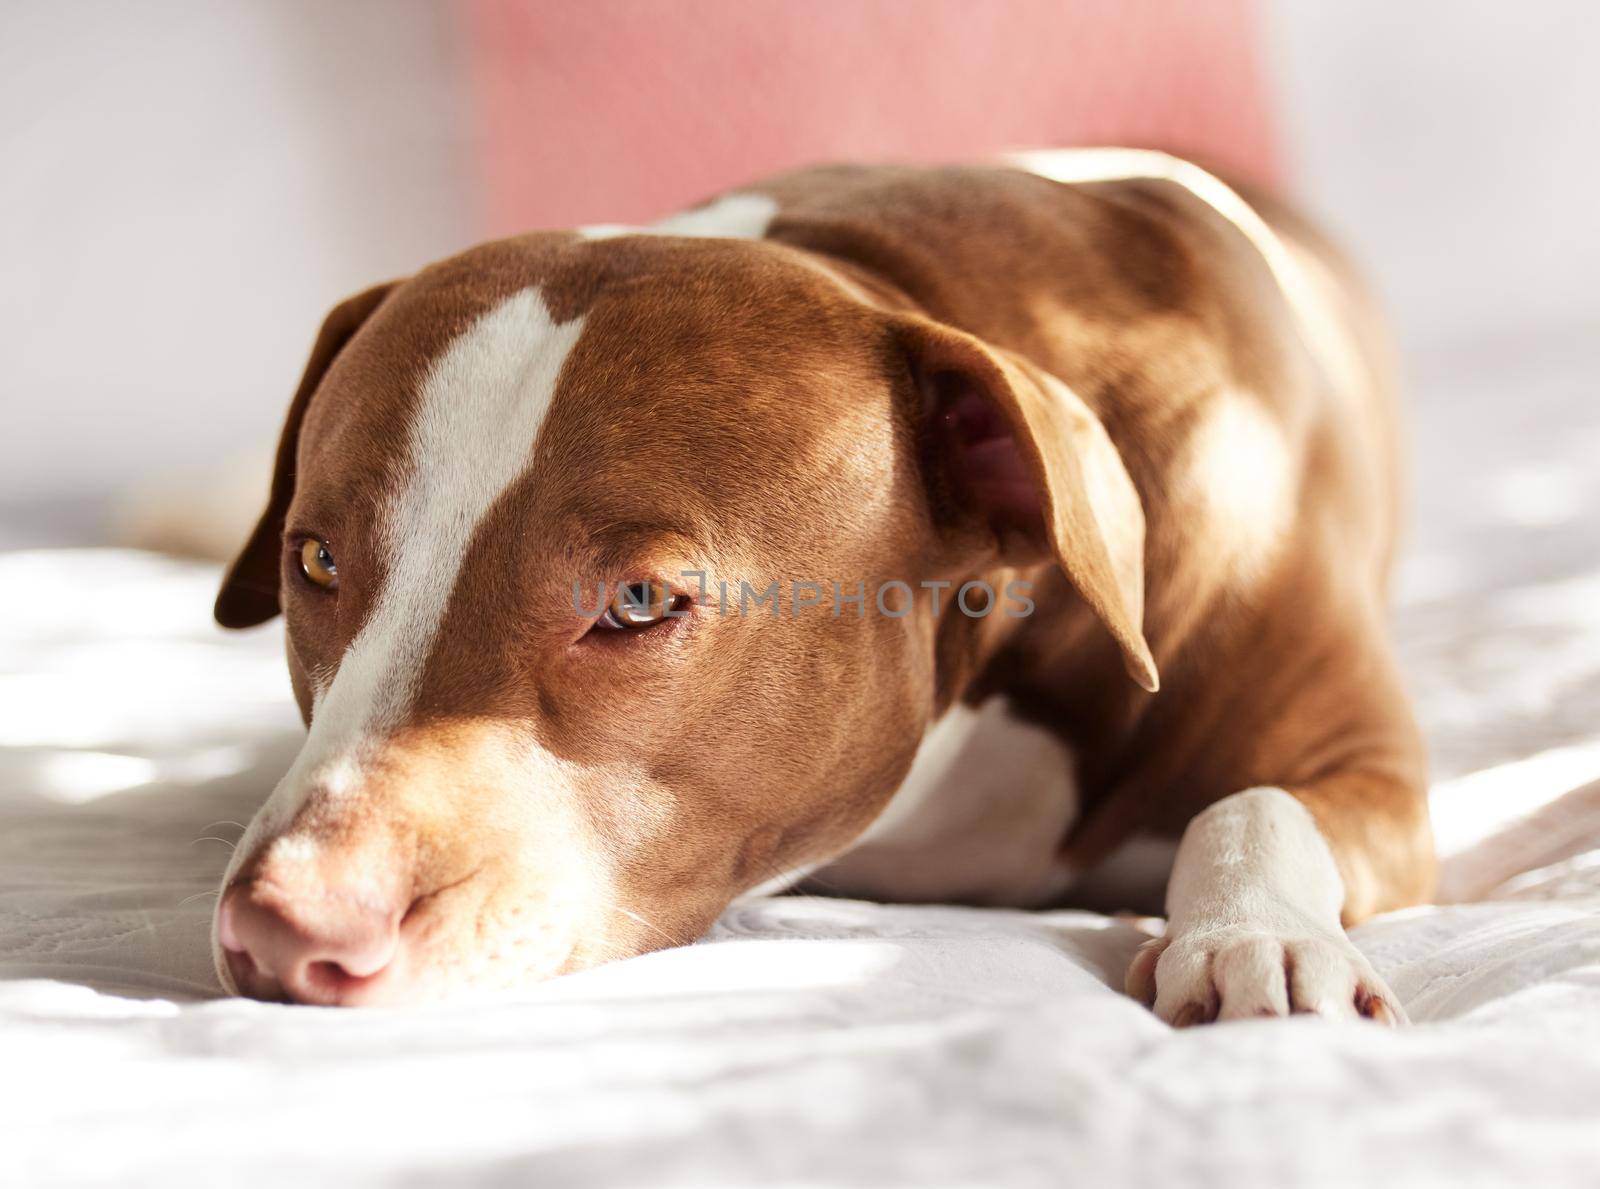 Just a quick nap. Portrait of an adorably sweet dog relaxing on a bed at home. by YuriArcurs